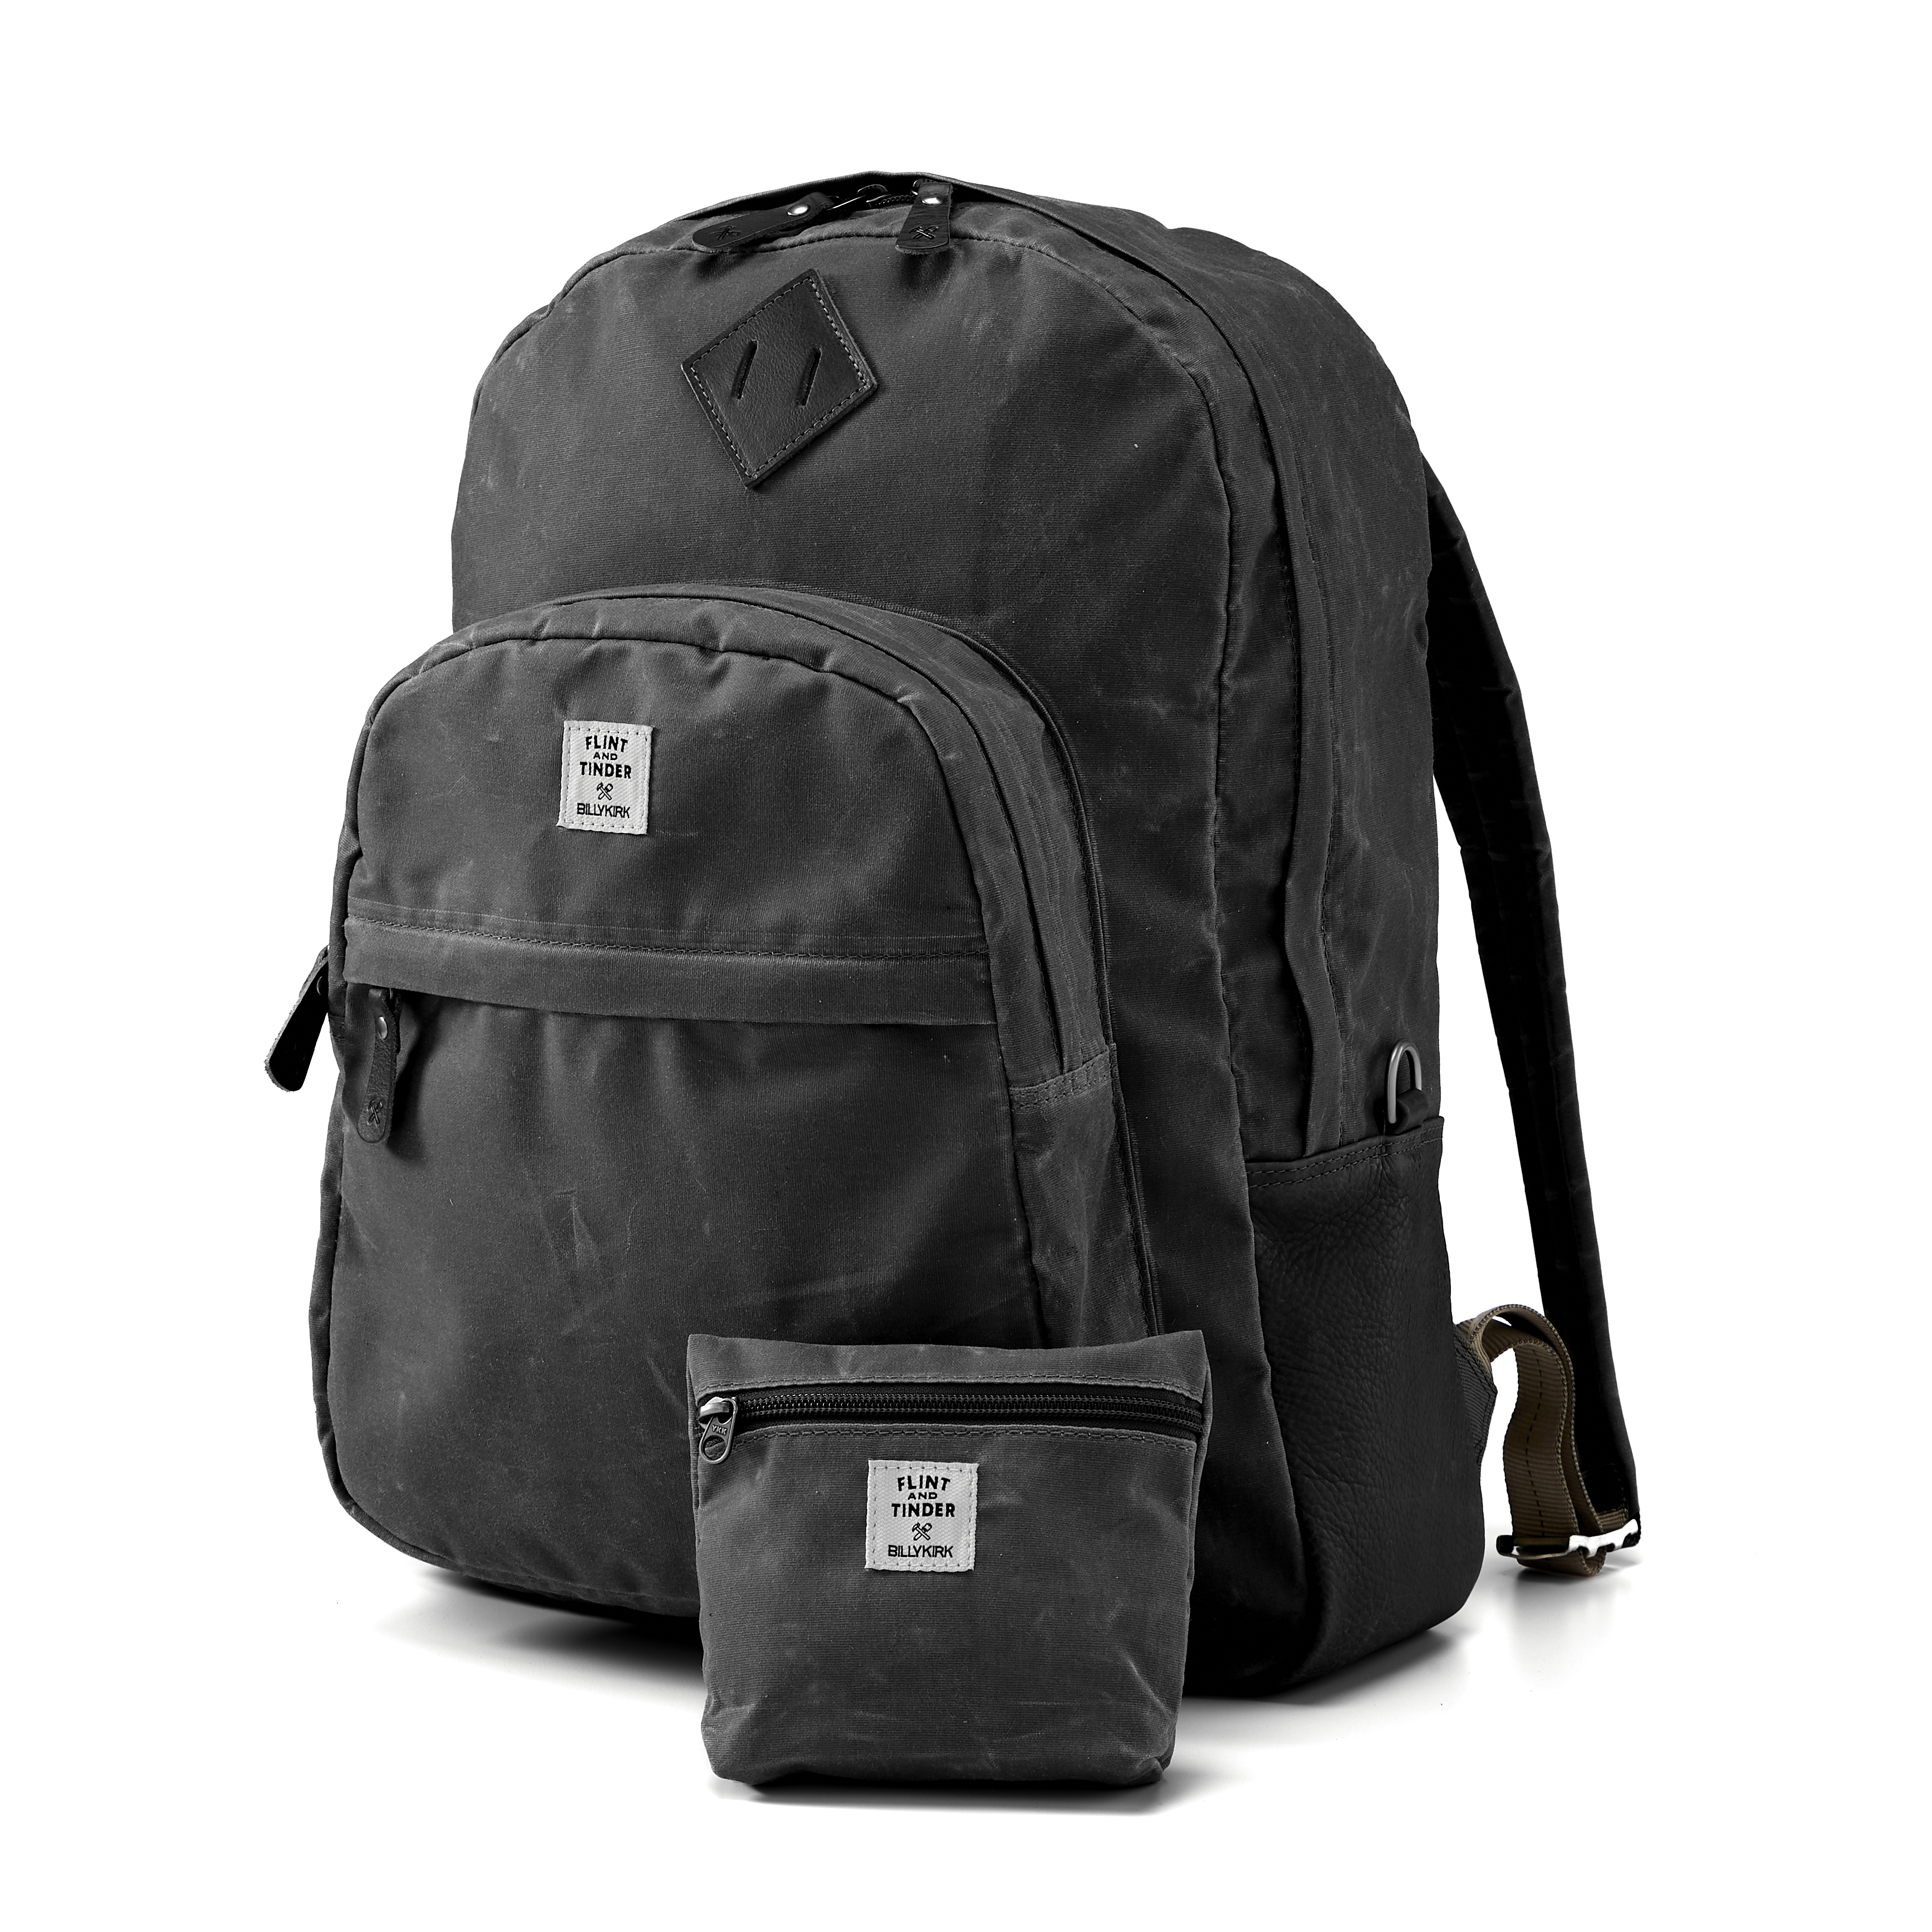 No. 297 Standard Issue Backpack